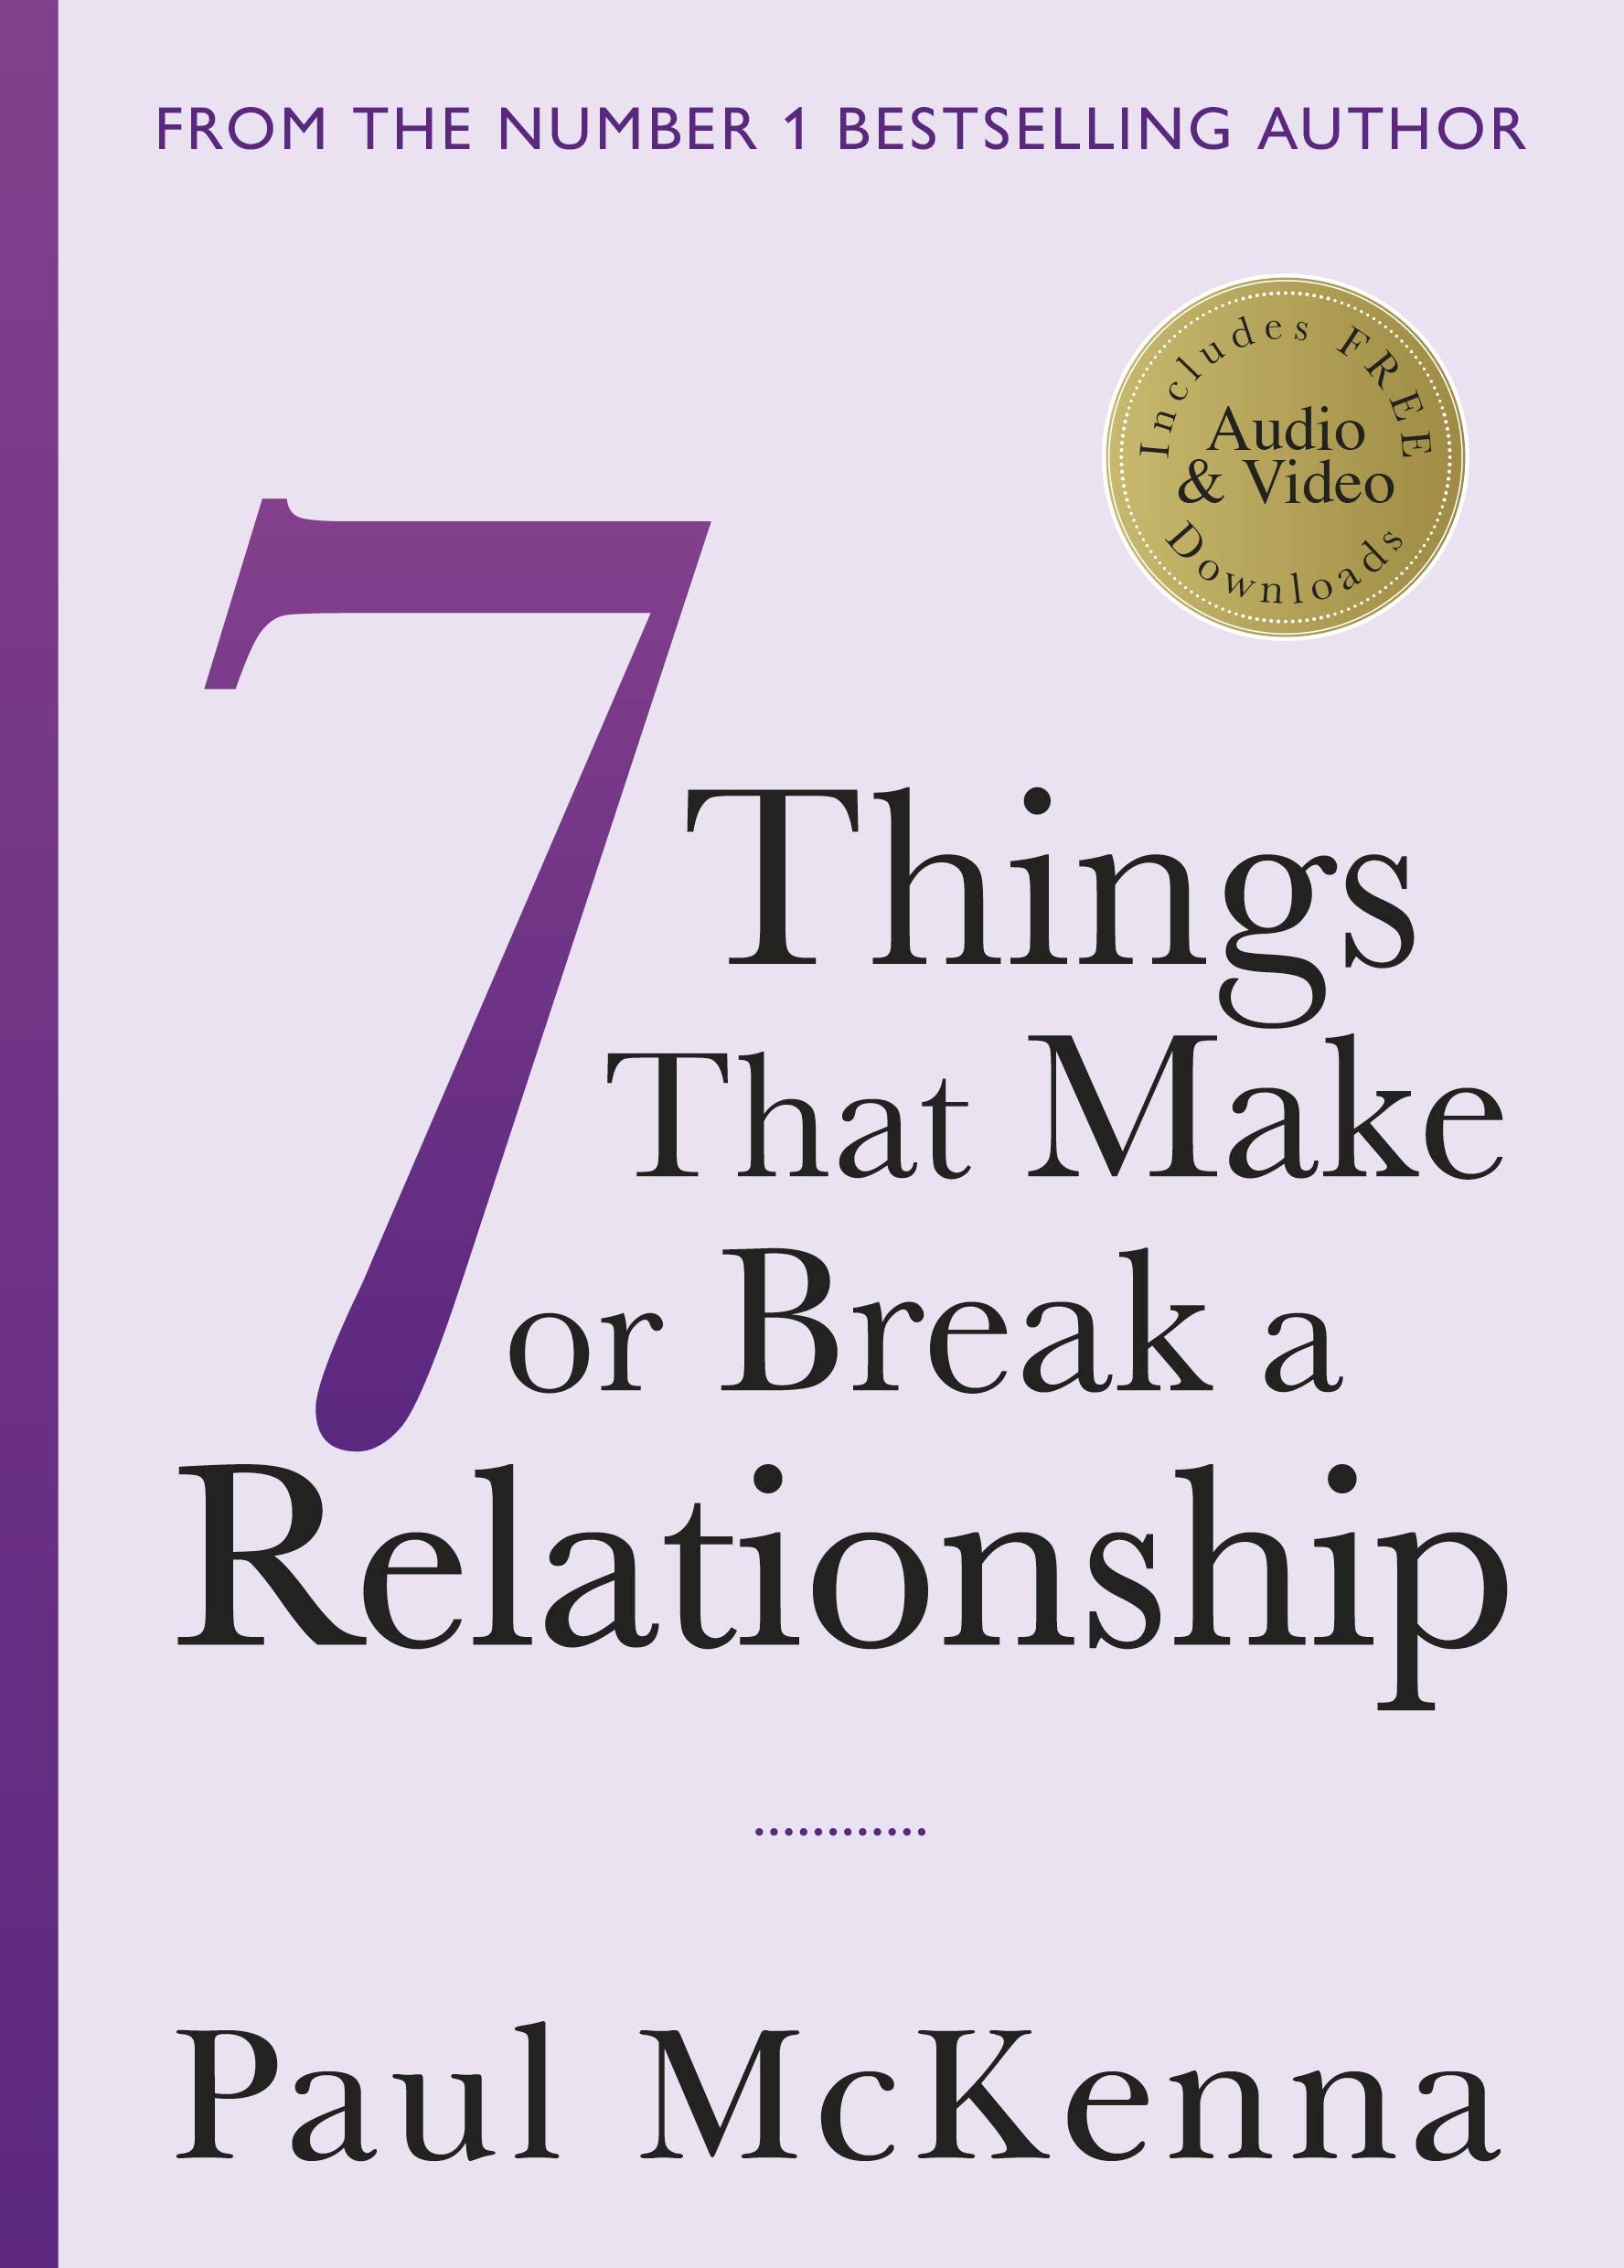 Seven Things That Make or Break a Relationship | Paul McKenna